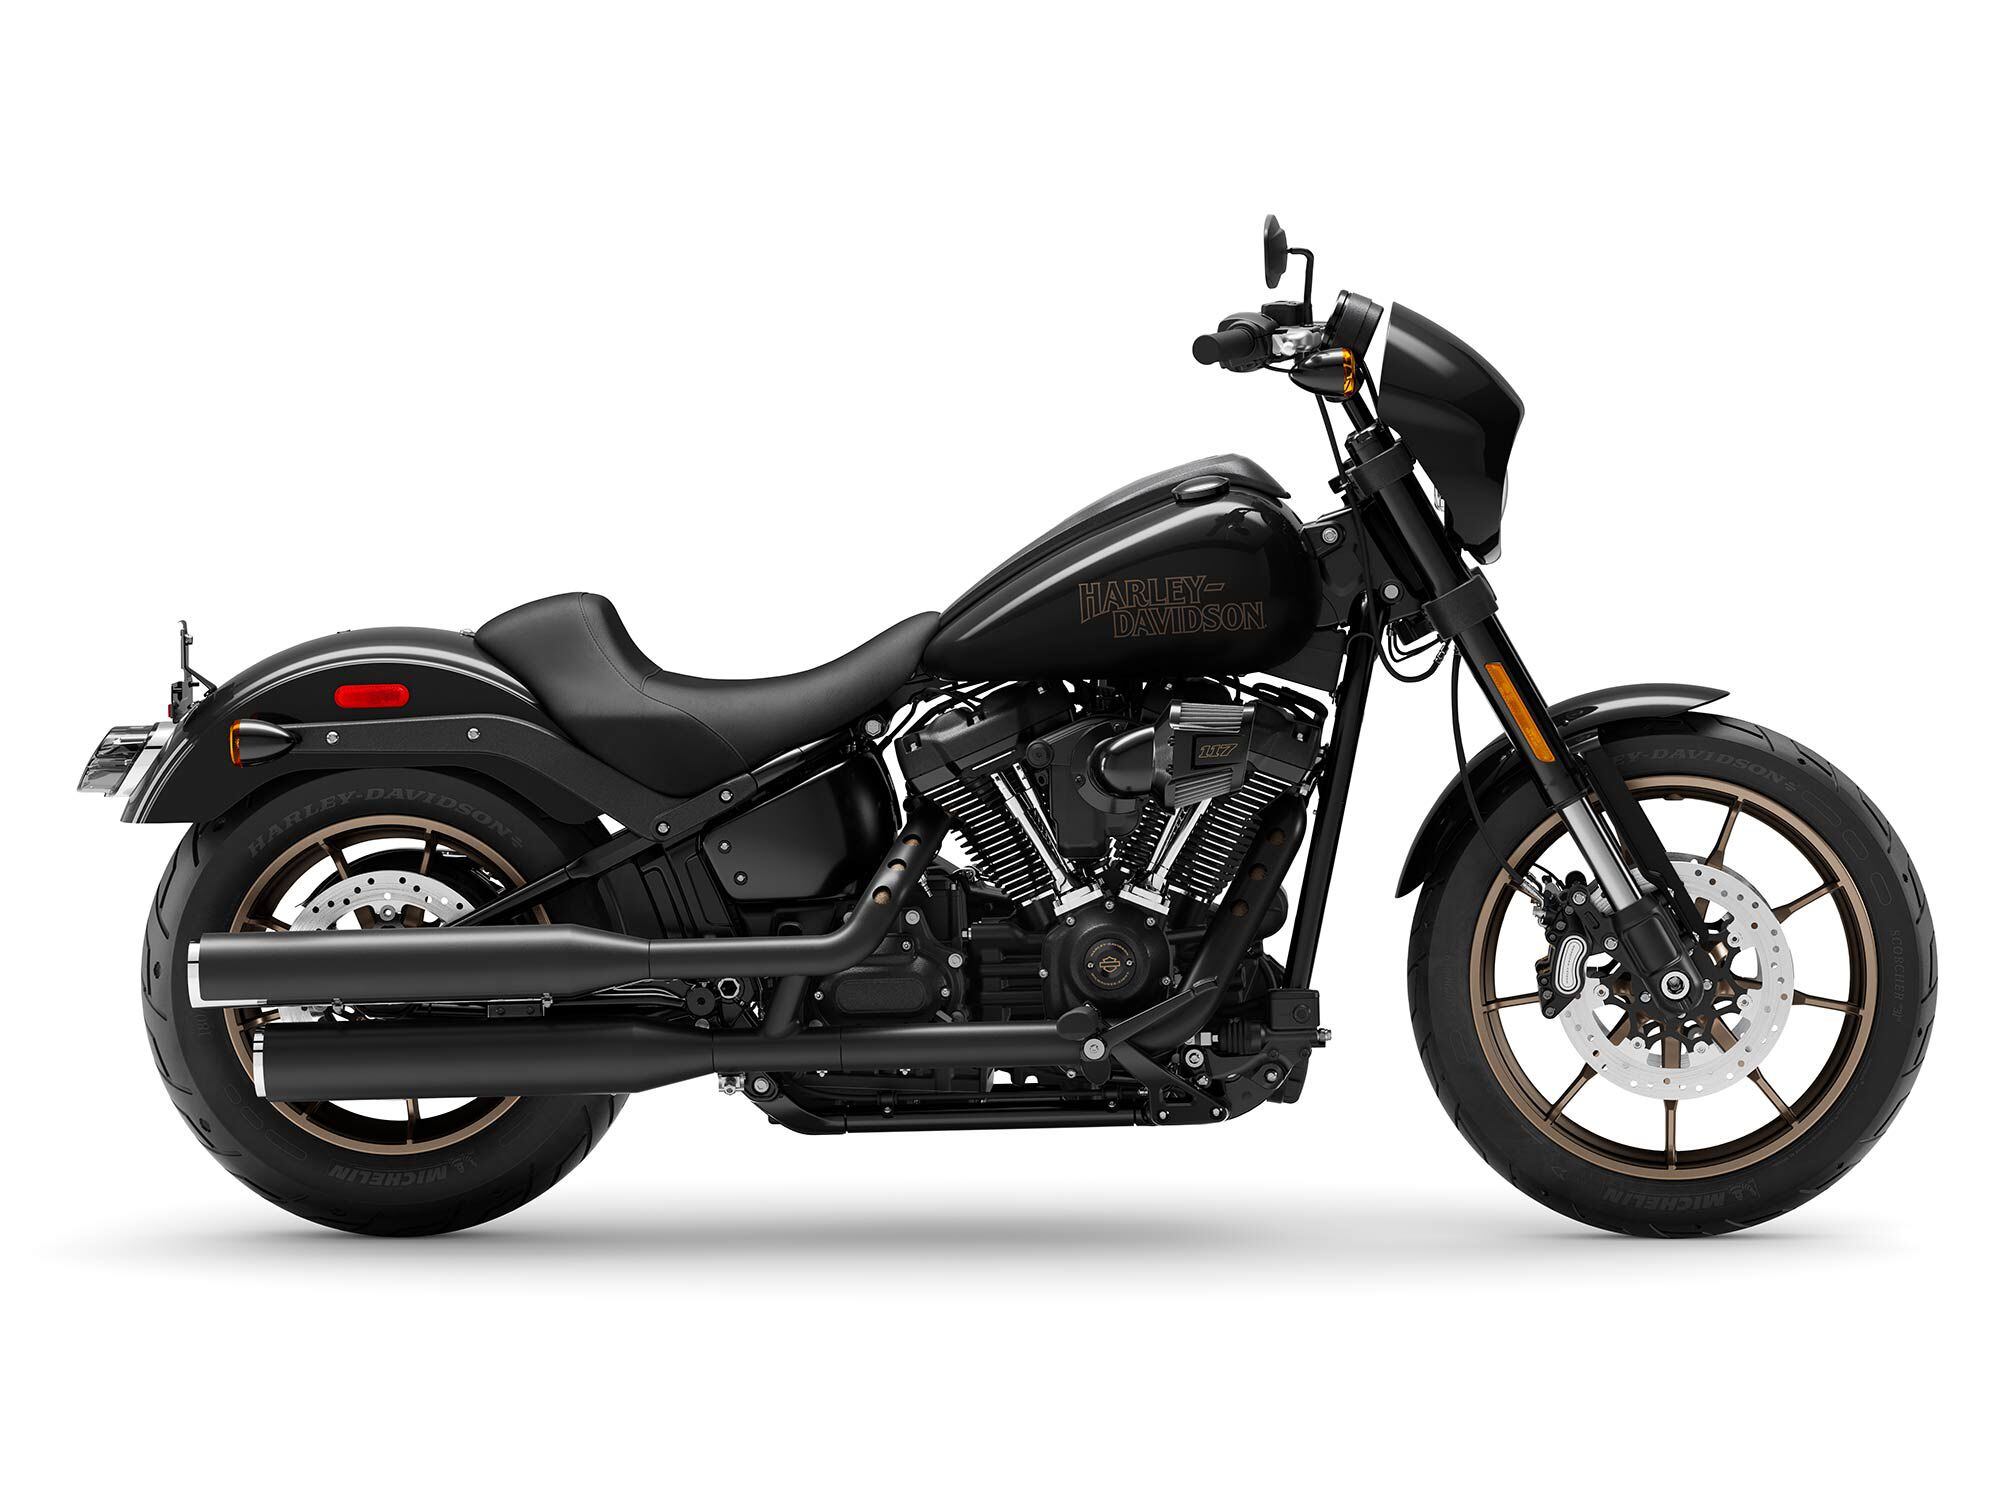 The 2022 Harley-Davidson Low Rider S has a starting MSRP of $17,530. Gunship Gray will set you back an additional $450.